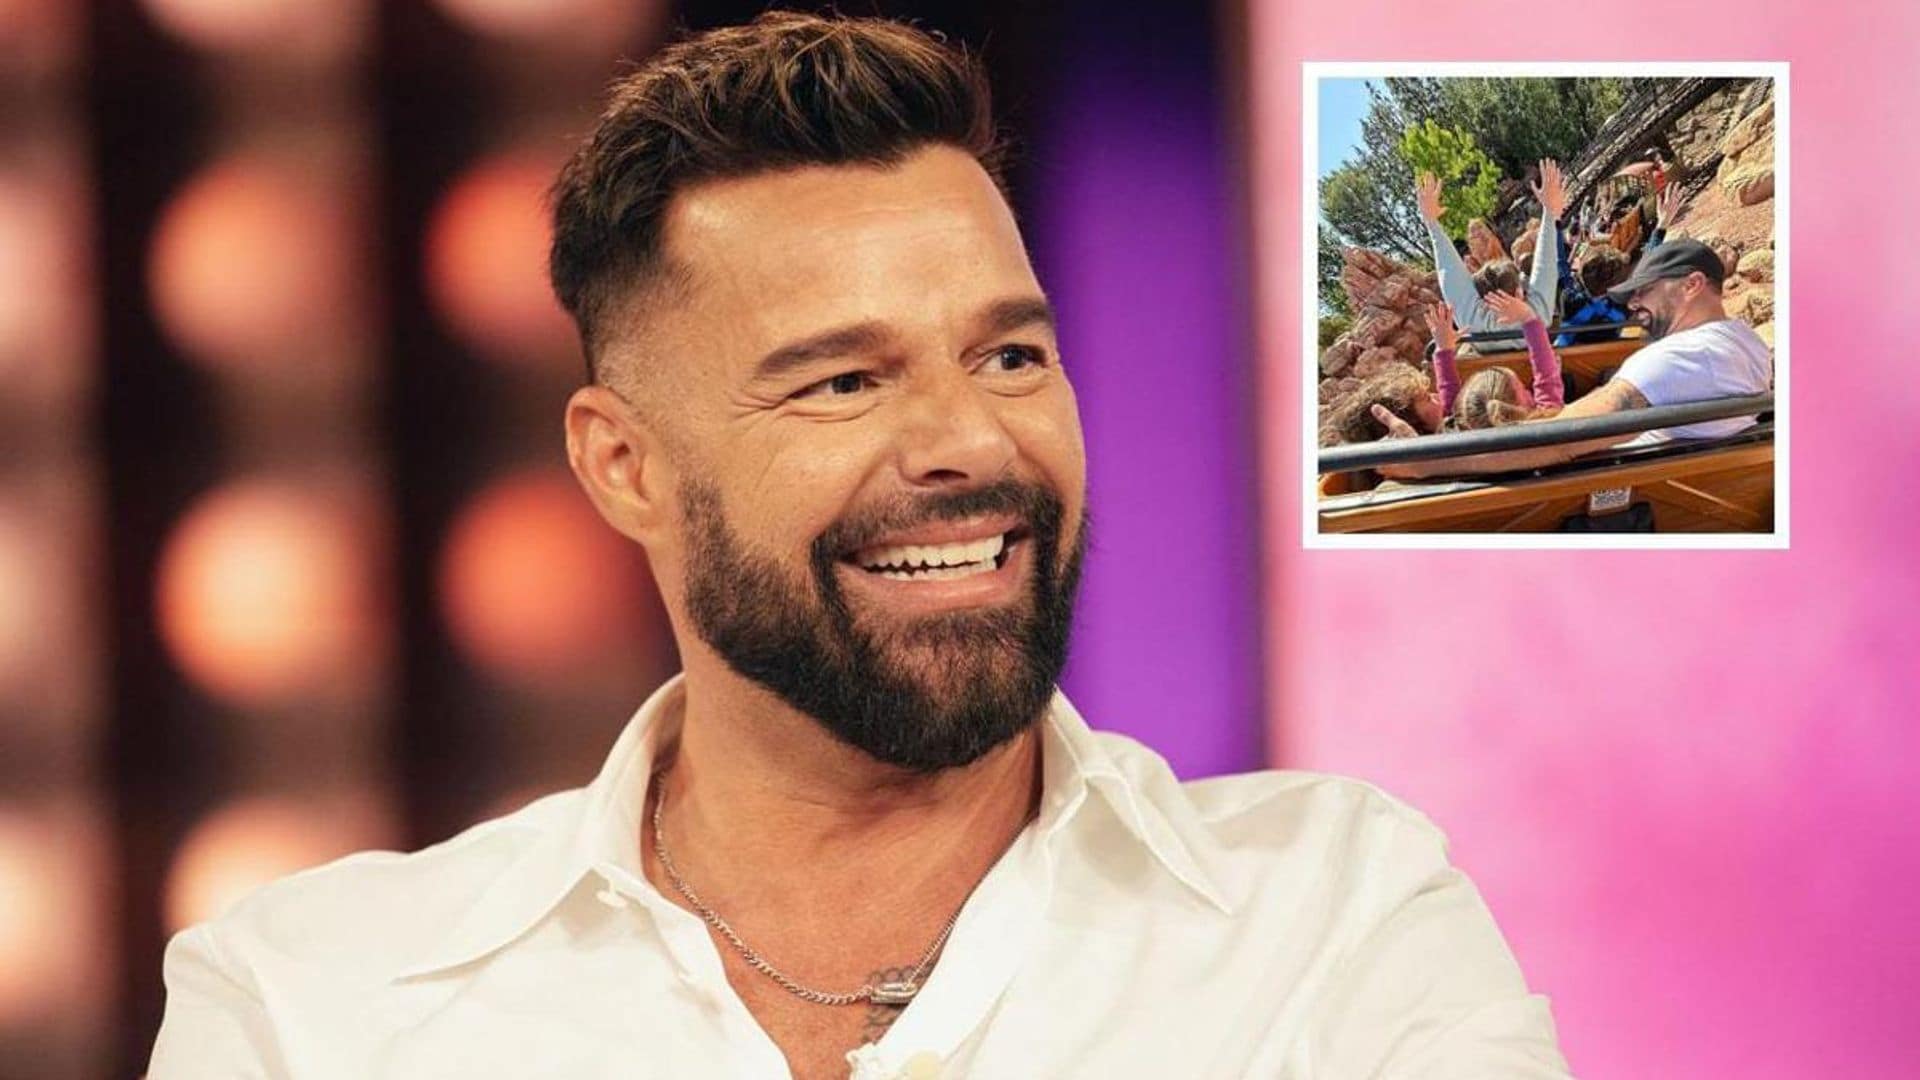 Ricky Martin, a ‘happy dad’ with his four kids in Disneyland